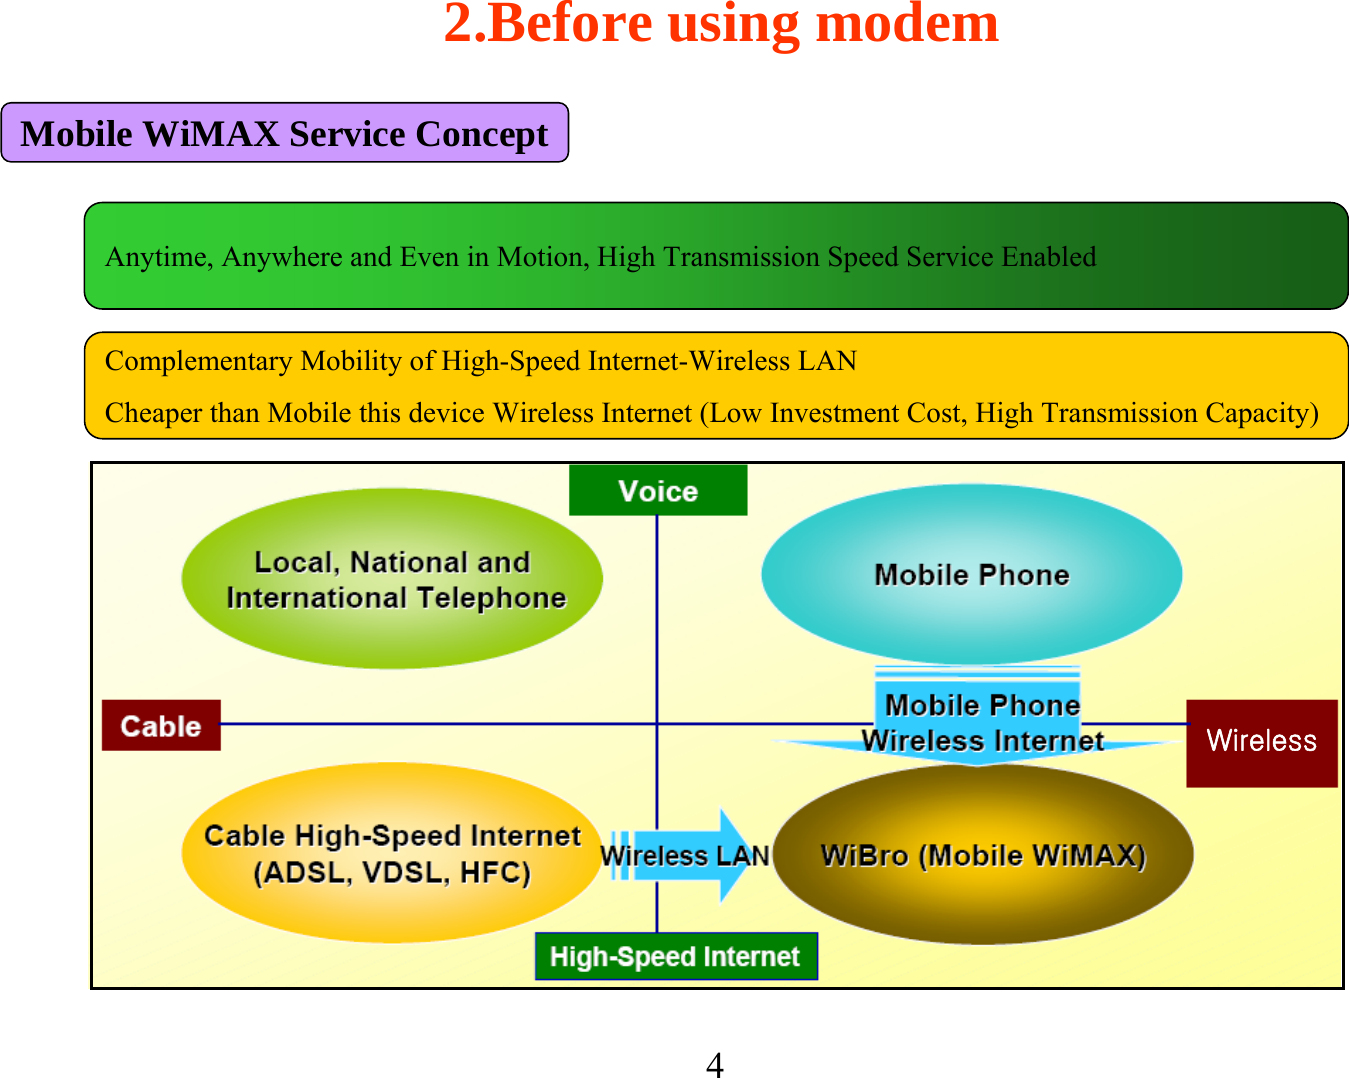 42.Before using modemMobile WiMAX Service ConceptAnytime, Anywhere and Even in Motion, High Transmission Speed Service EnabledComplementary Mobility of High-Speed Internet-Wireless LANCheaper than Mobile this device Wireless Internet (Low Investment Cost, High Transmission Capacity)Wireless